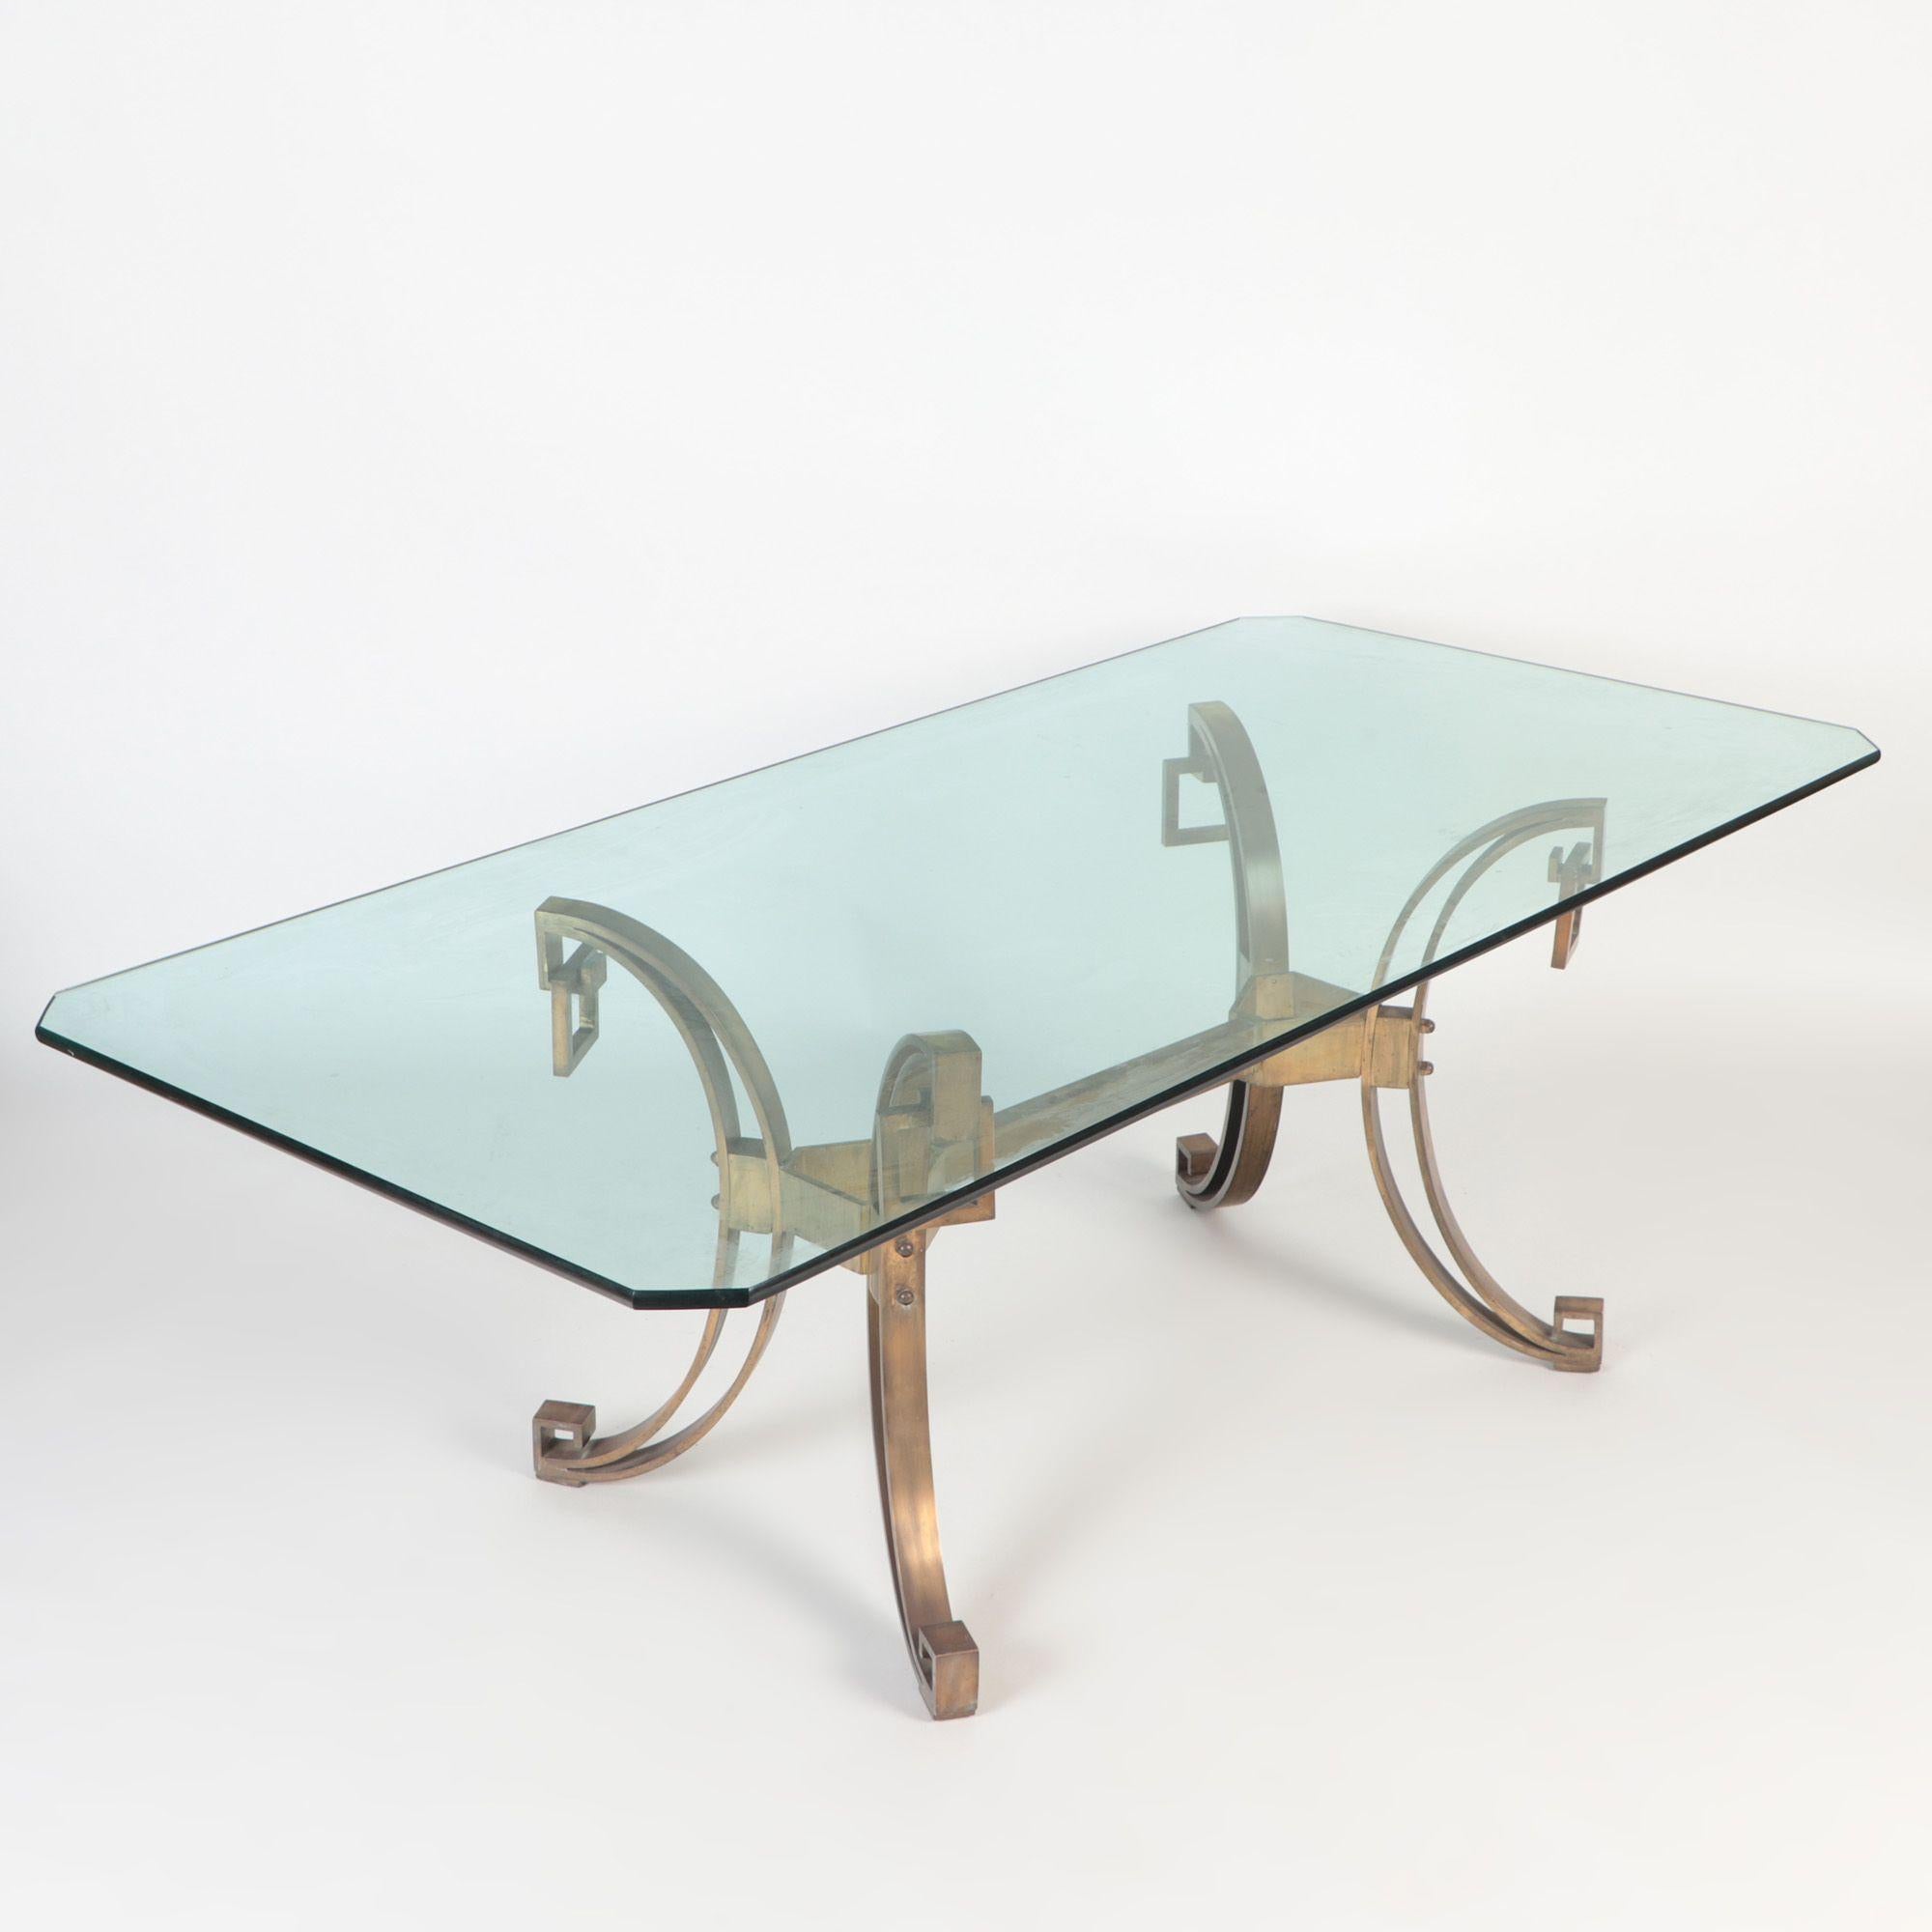 A French Modern Solid bronze dining table having a glass top, in the manner of Ramsay C 1940. The bronze bas top has four decorative rings and legs are turned inward in the form of Greek keys. Table was found in Buenos Aires, Argentina.